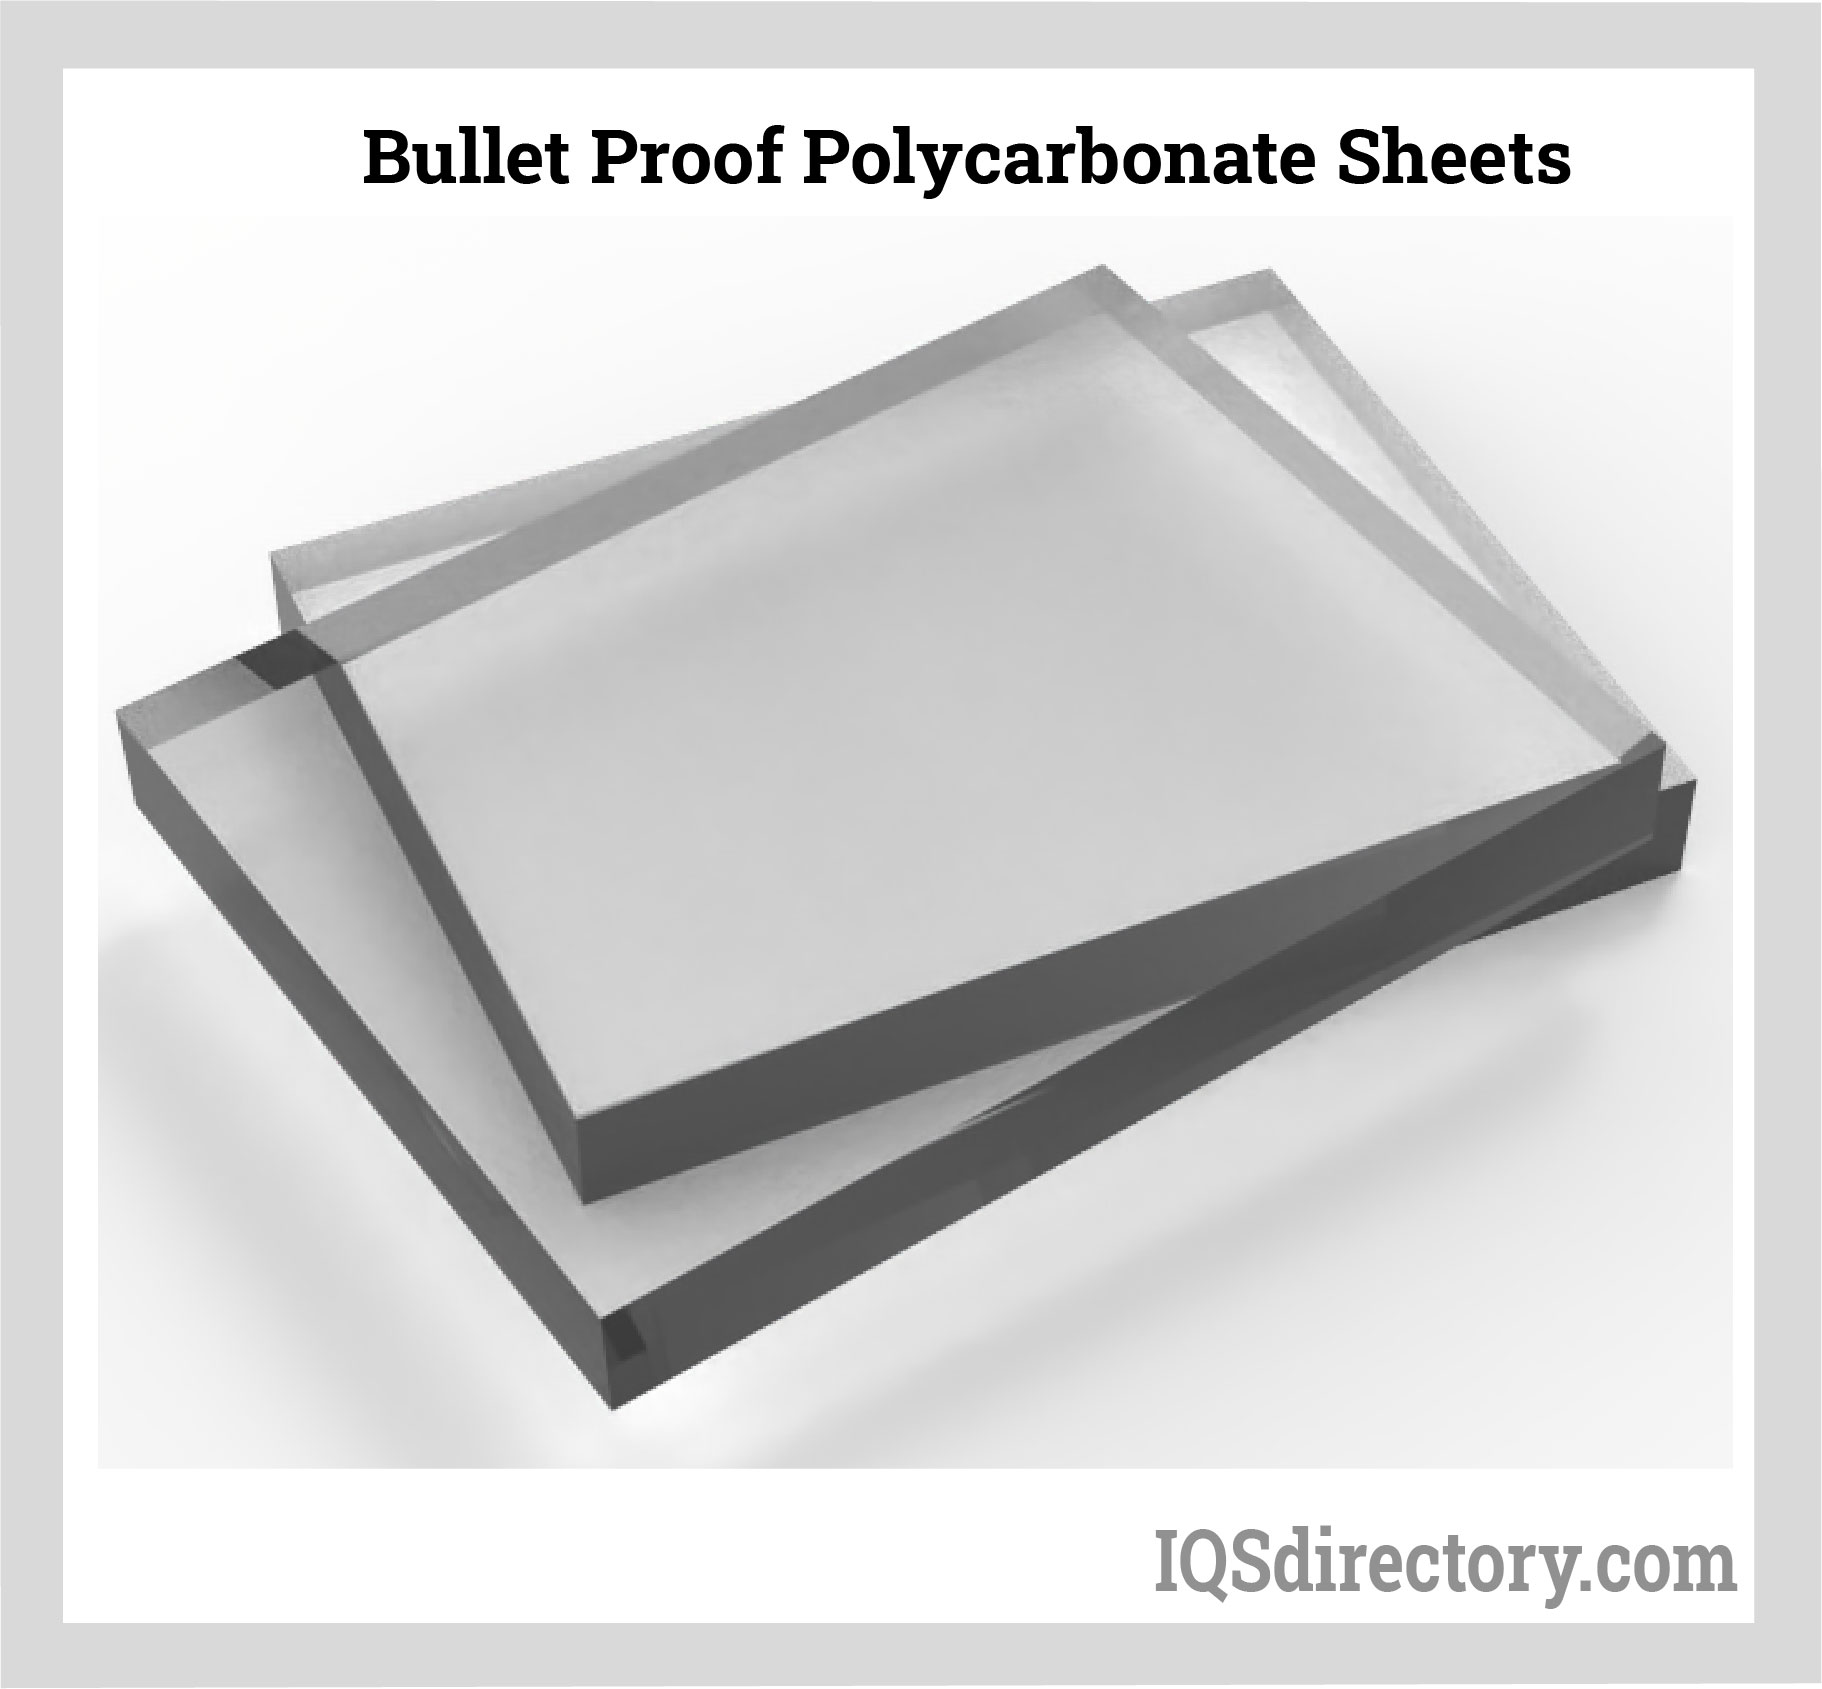 Bullet Proof Polycarbonate Sheets